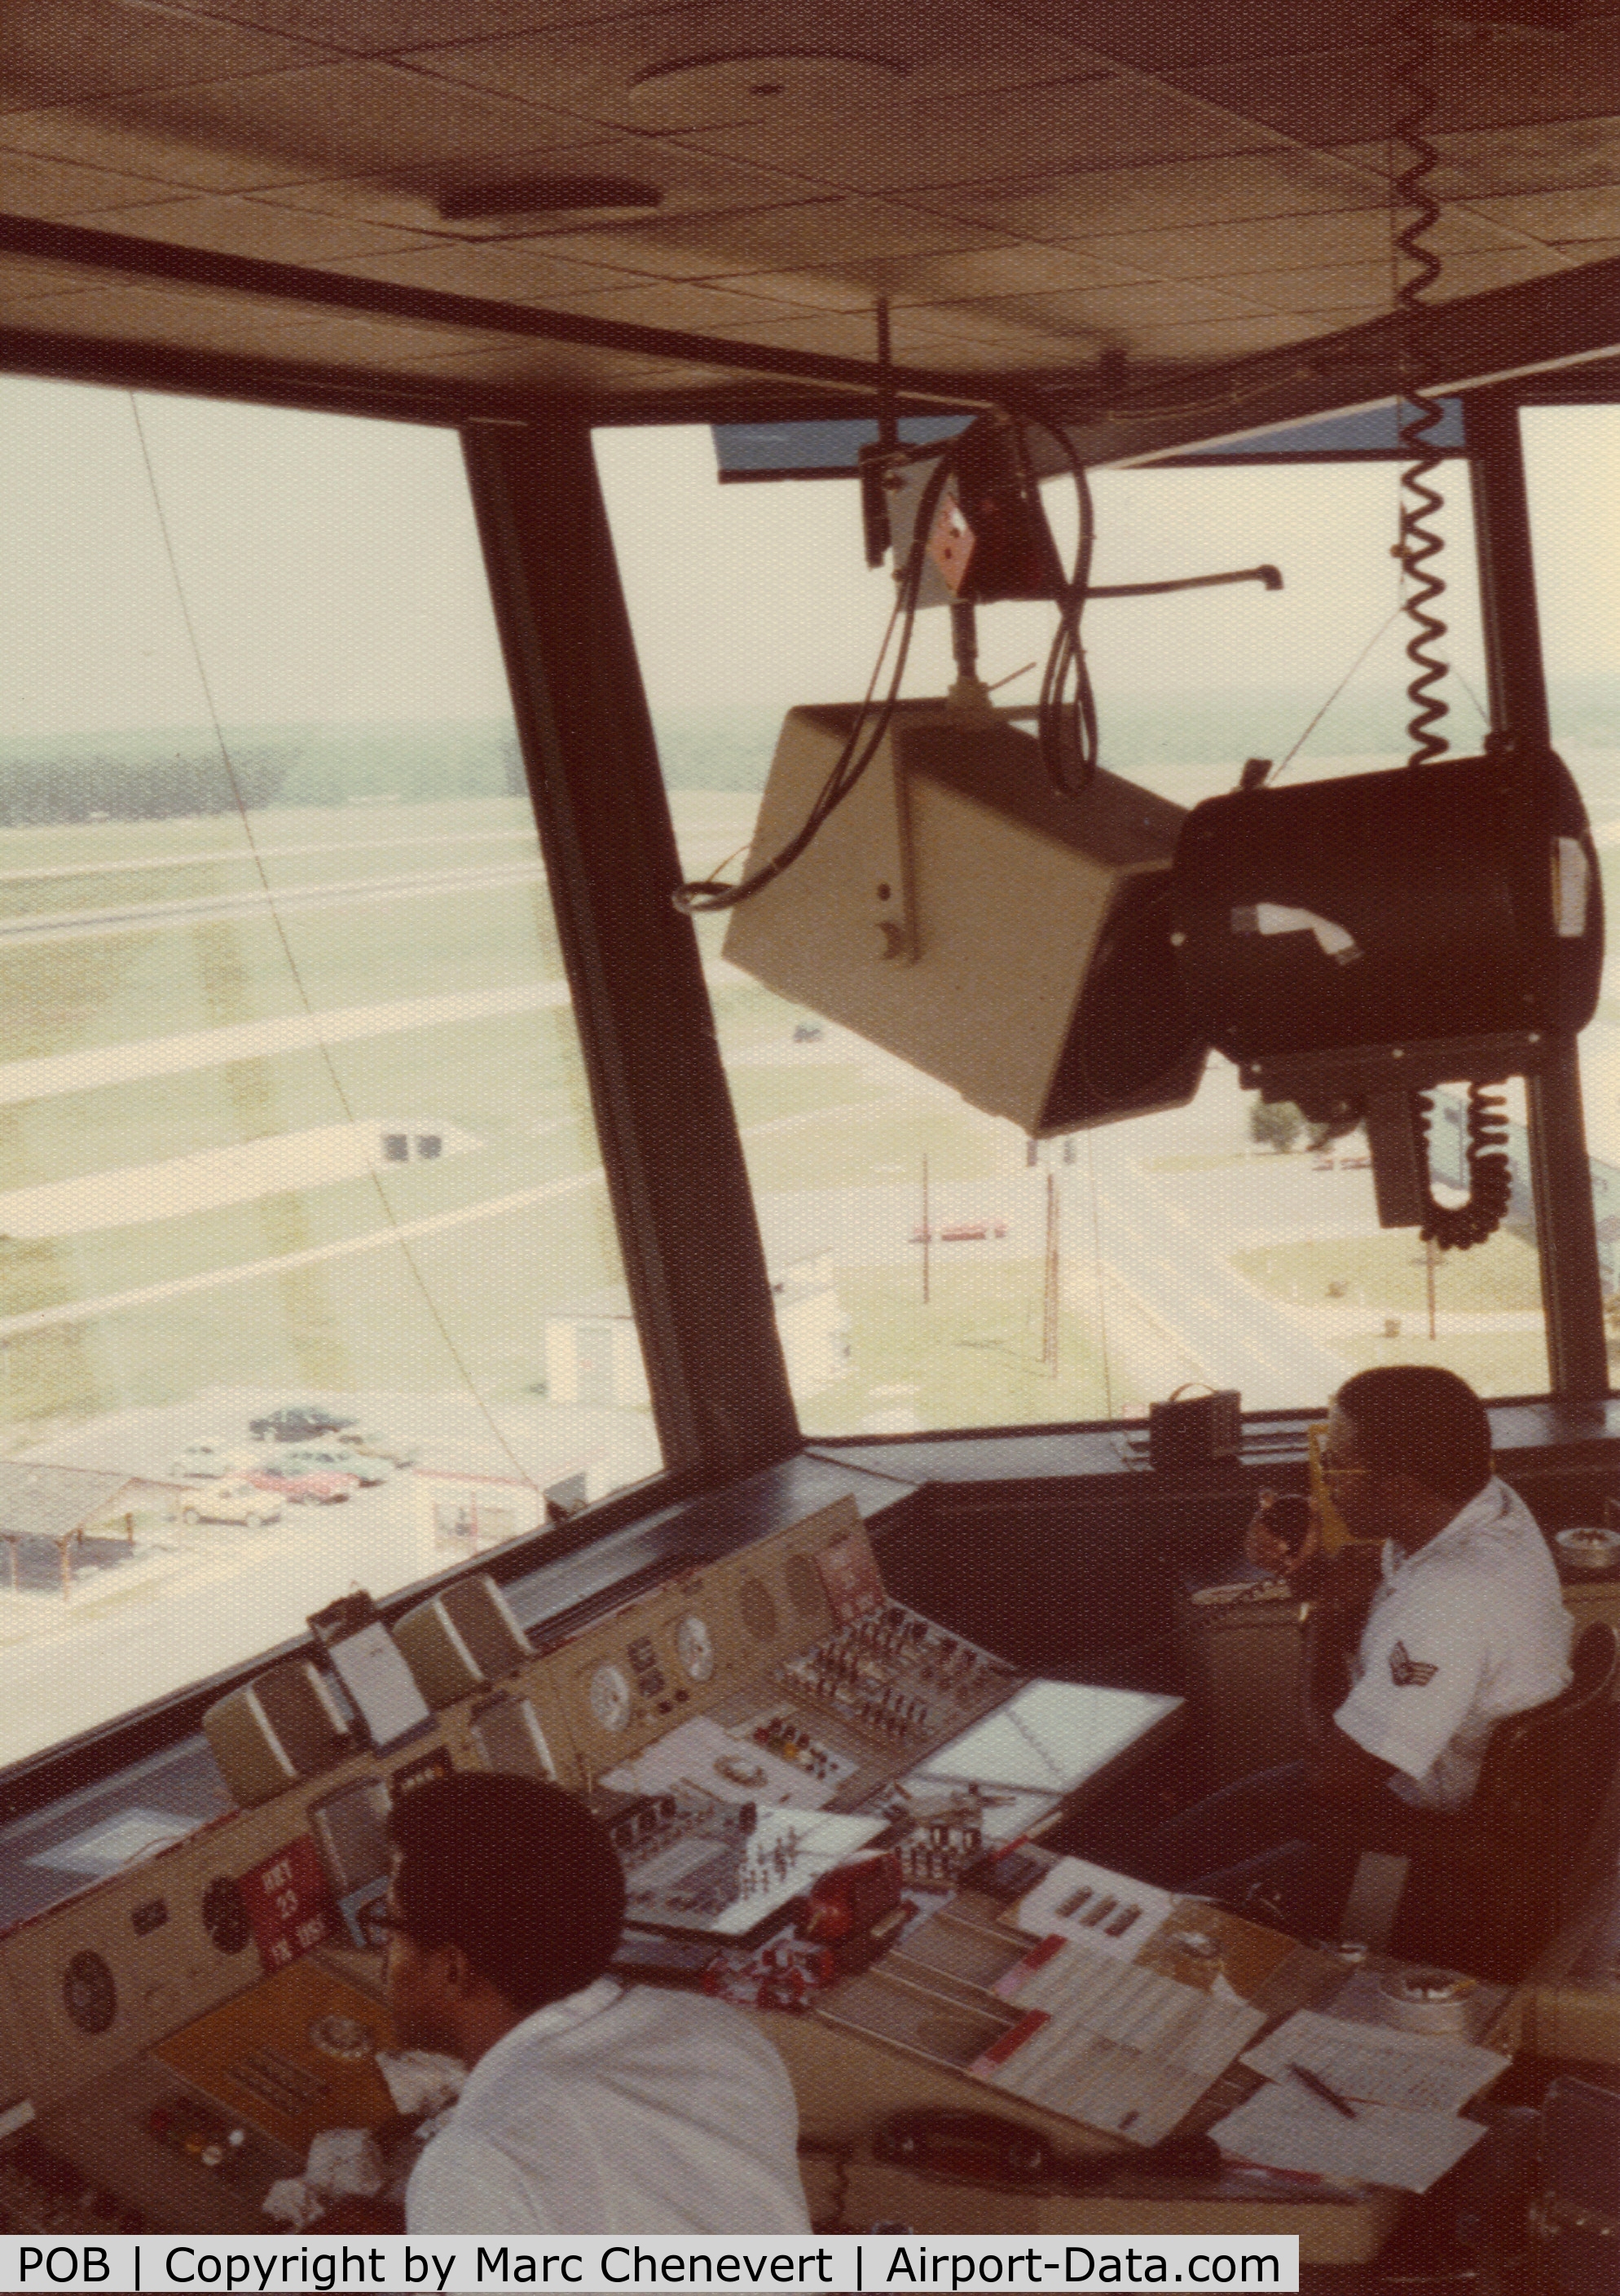 Pope Aaf Airport (POB) - My tower crewmates - August 1979